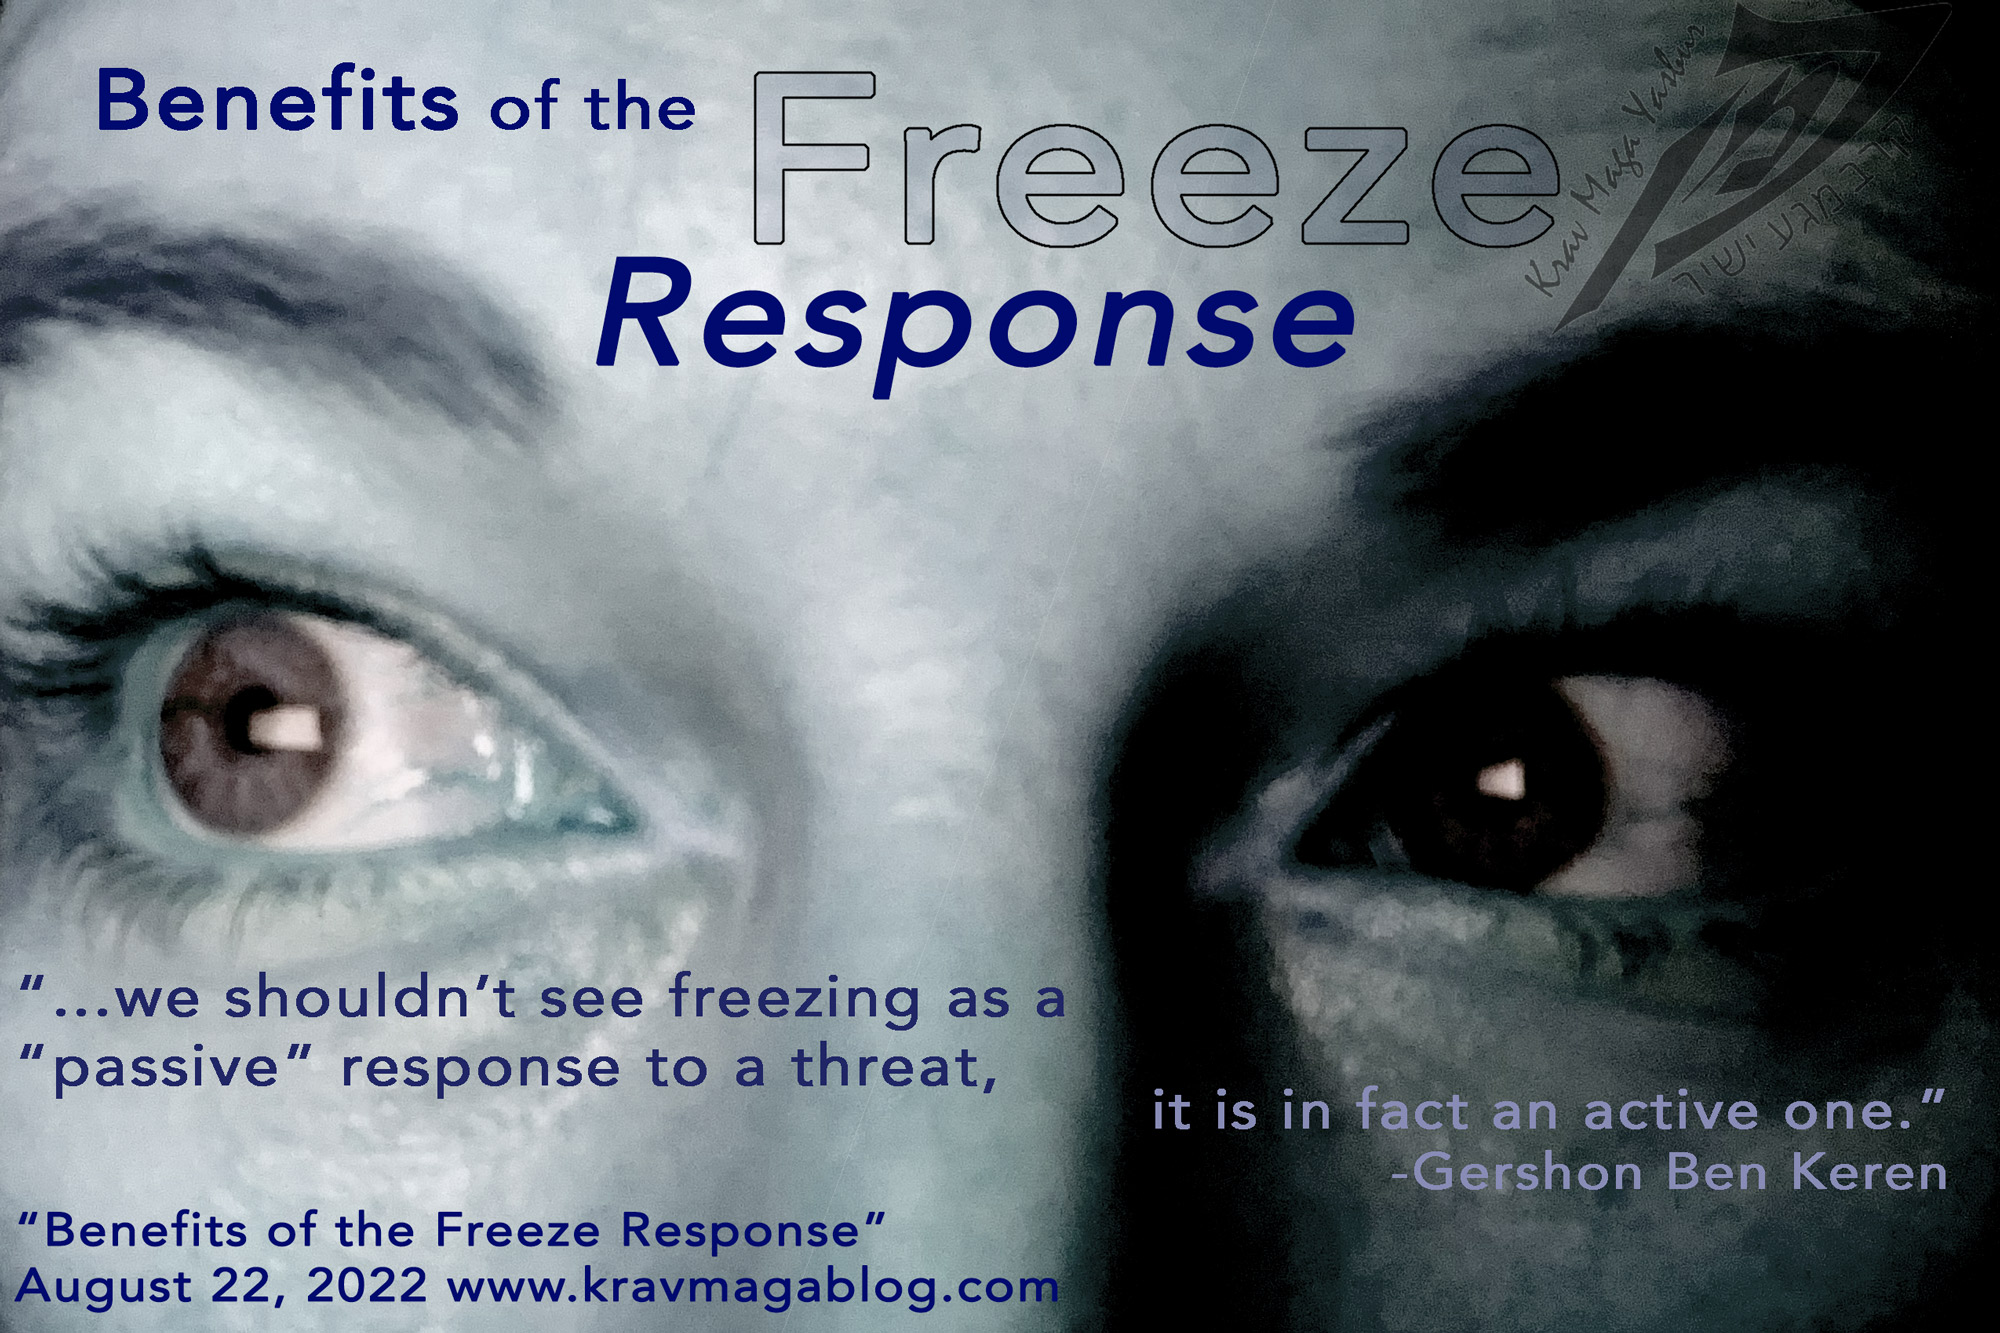 Blog About Benefits of the Freeze Response